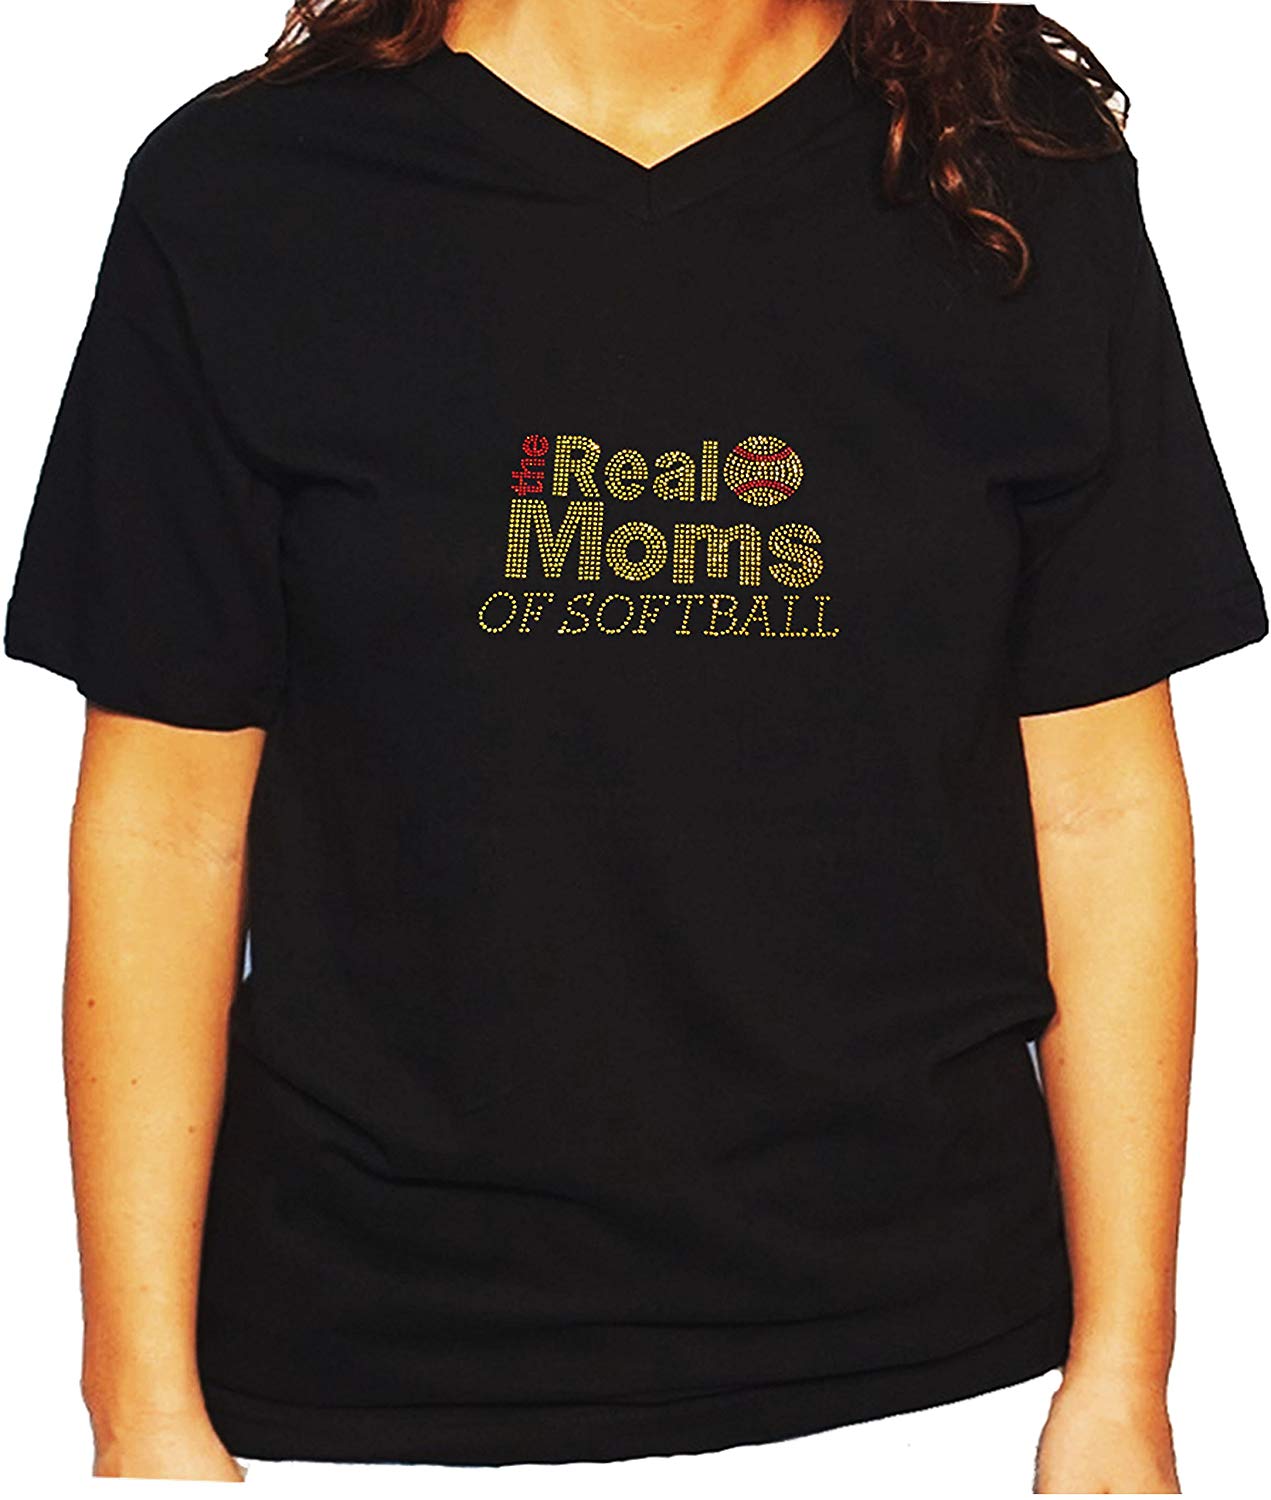 Women's / Unisex T-Shirt with The Real Moms of Softball in All Gold in Rhinestones